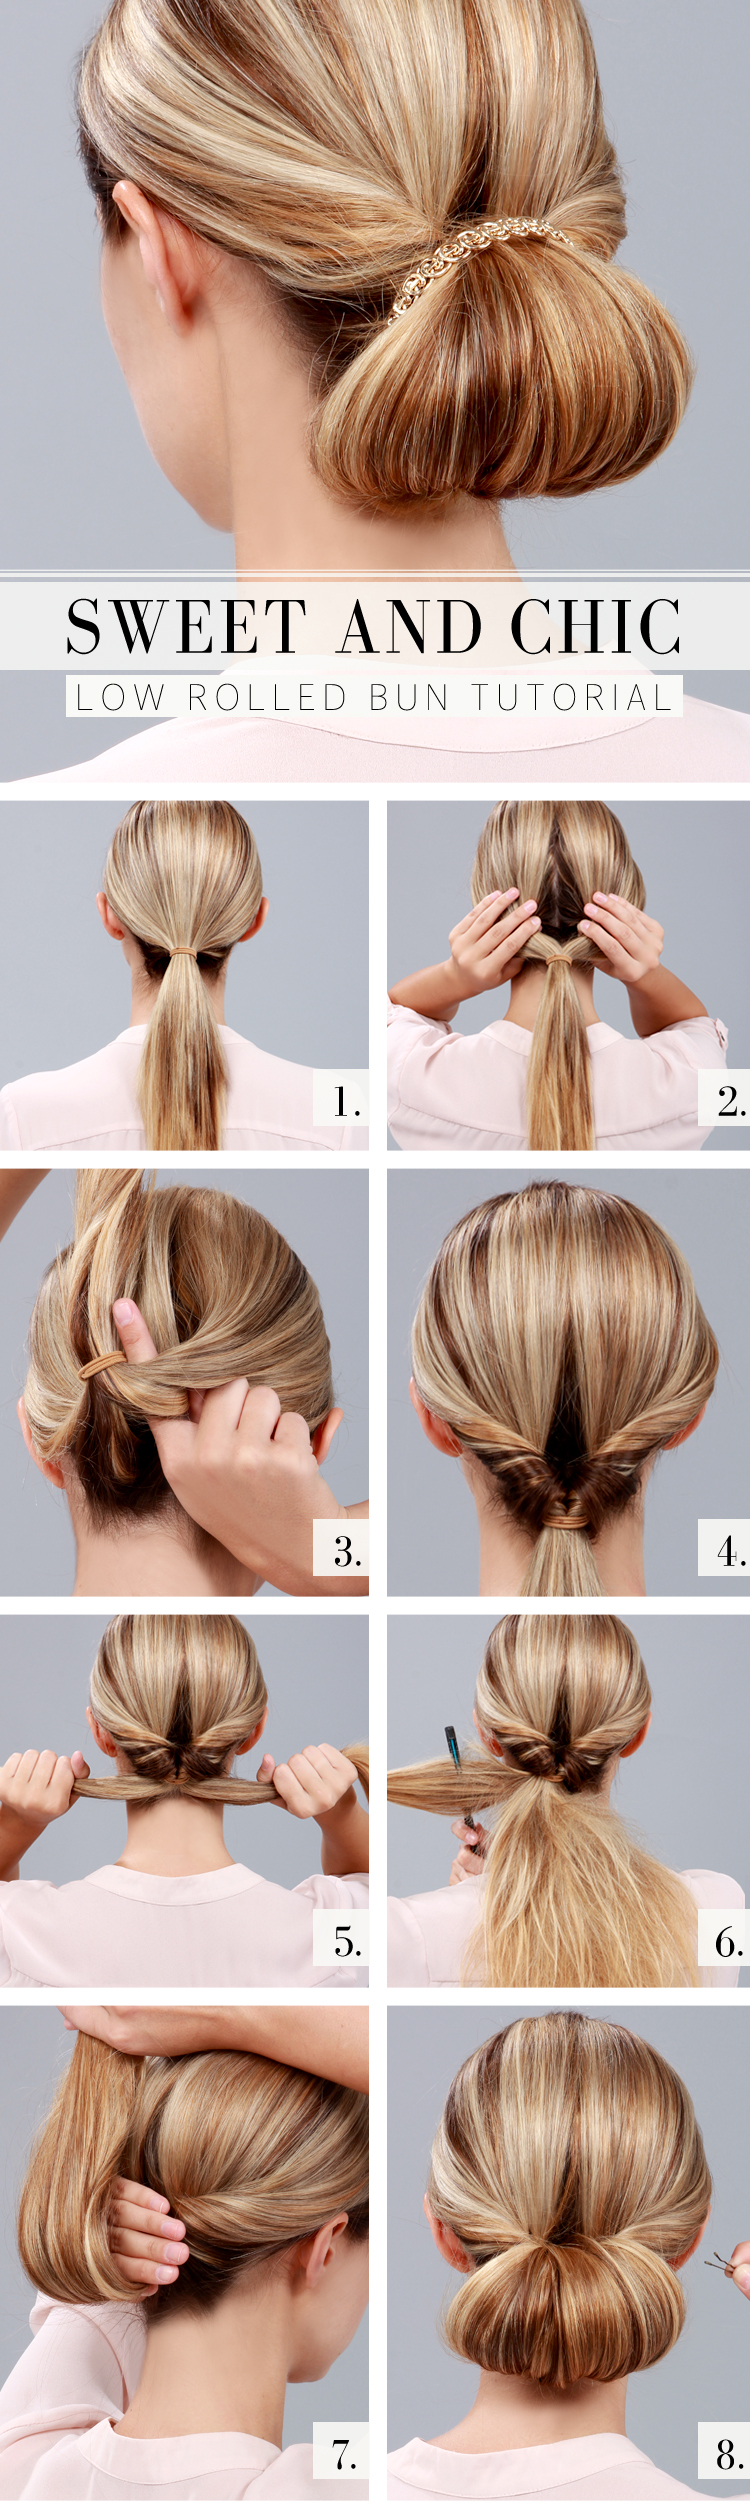 RollUpdo 15 Lovely and Useful Hairstyle Tutorials